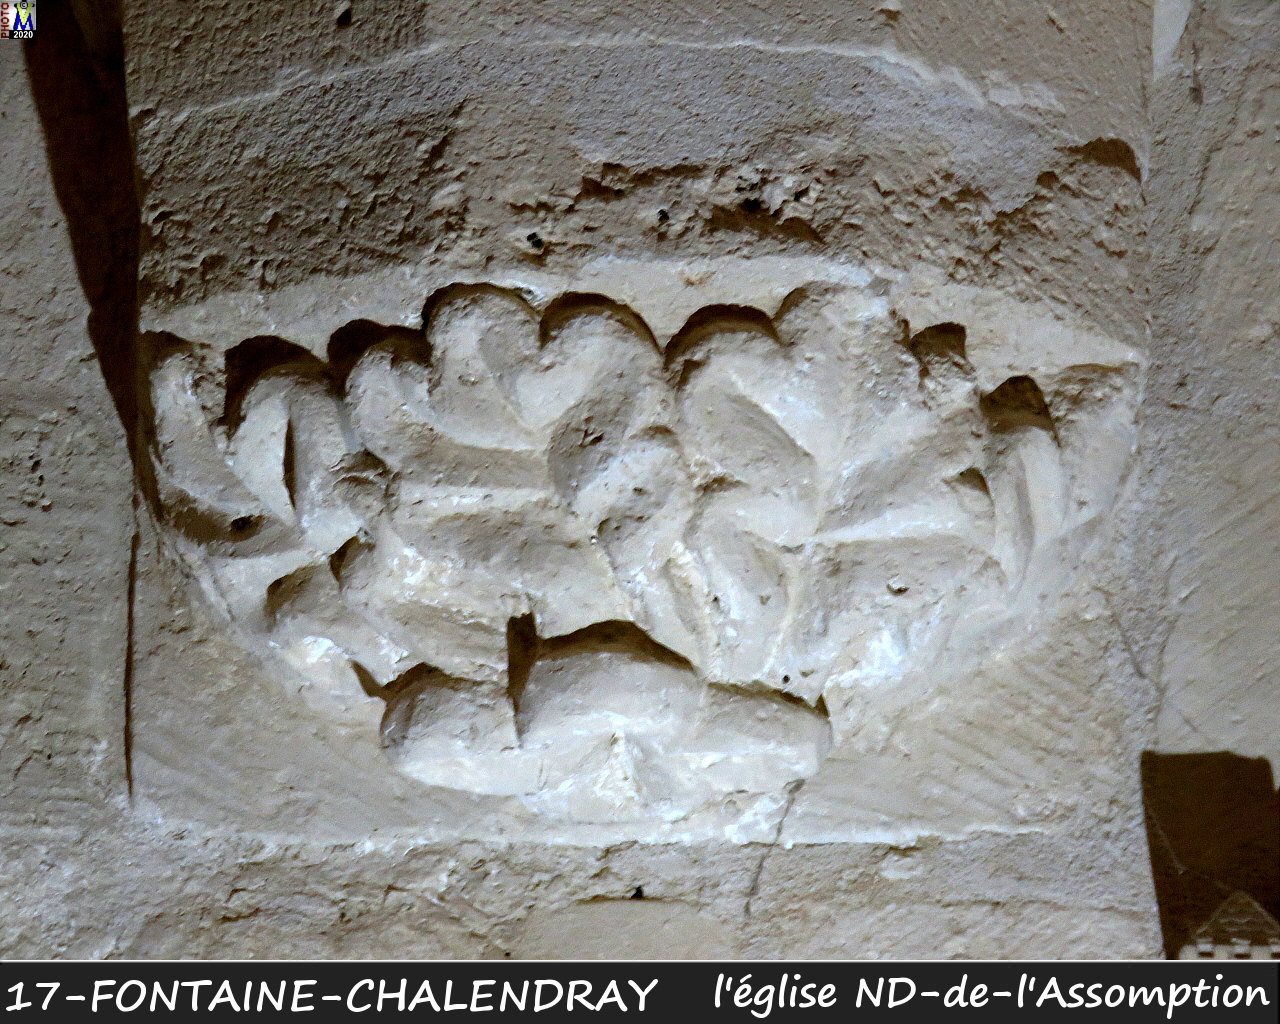 17FONTAINE-CHALENDRAY_eglise_1118.jpg